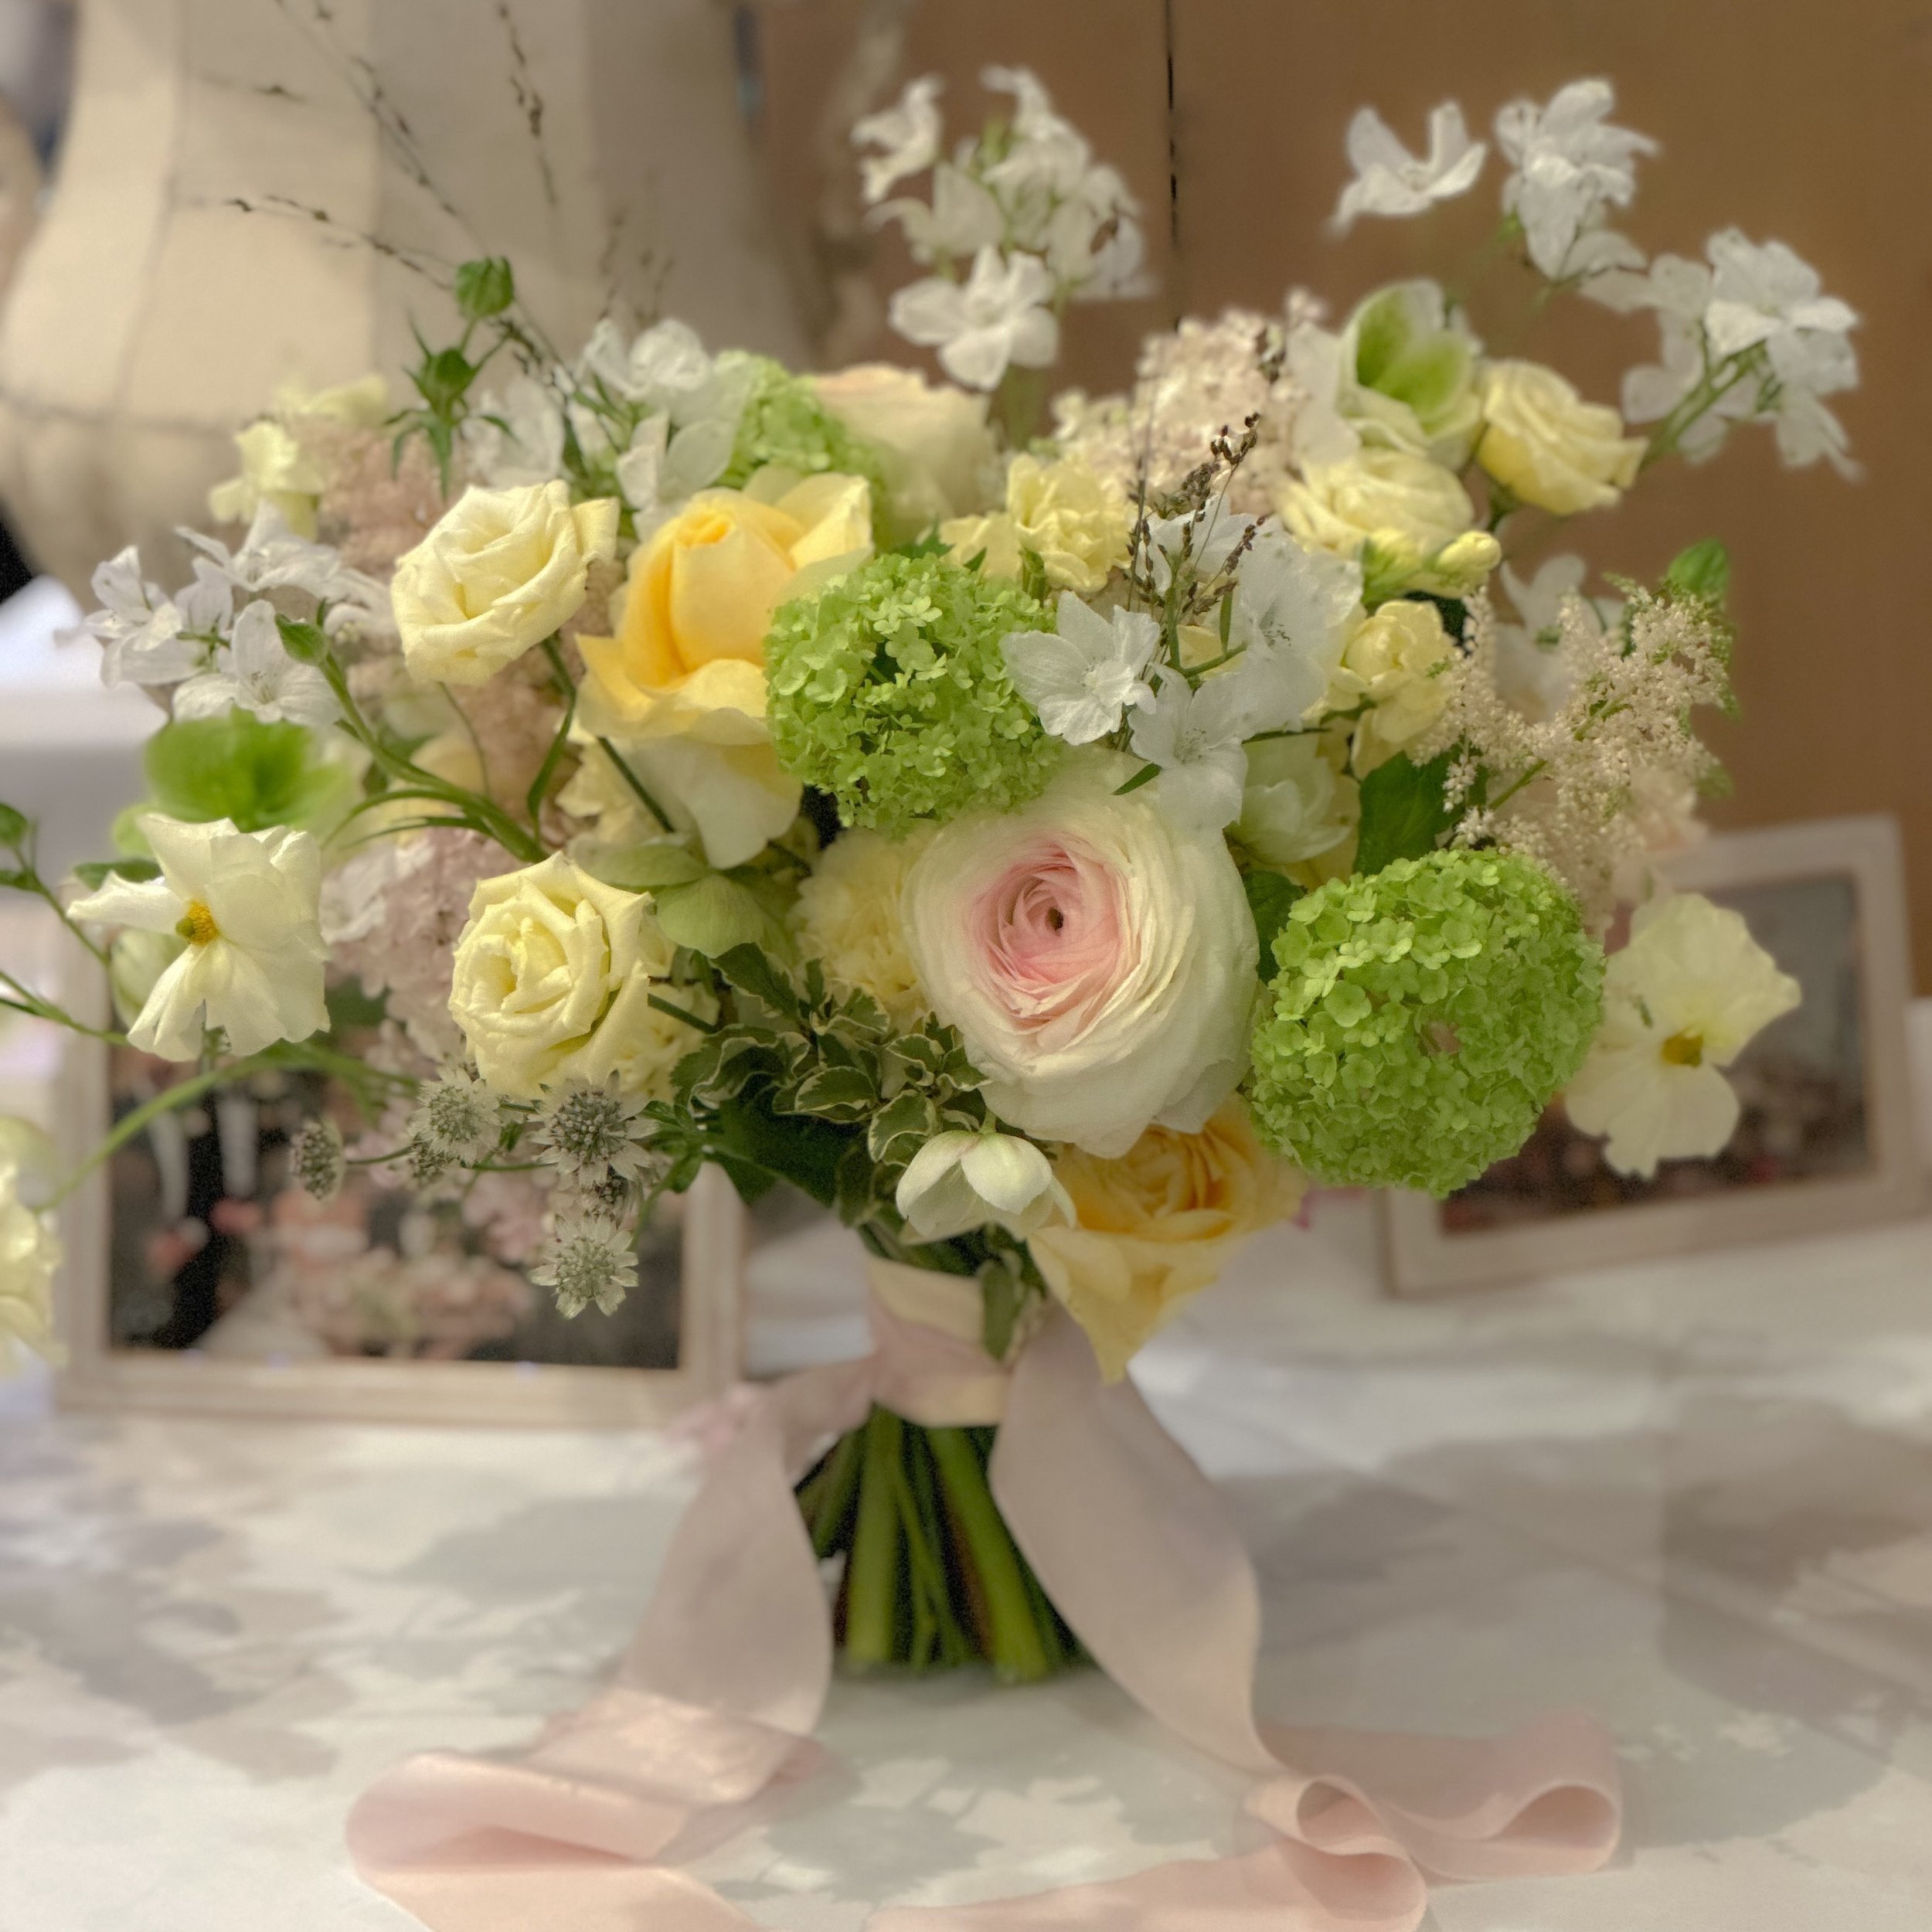 Spring pastels 🌸

The flowers know it&rsquo;s Spring even if the weather isn&rsquo;t playing. Bringing some prettiness and colour to a dreary day. 

Sending flowery wishes, 
Diane x

.
.
.

#Springbouquet #pastelbouquet #nantwichflorist #butterflyro